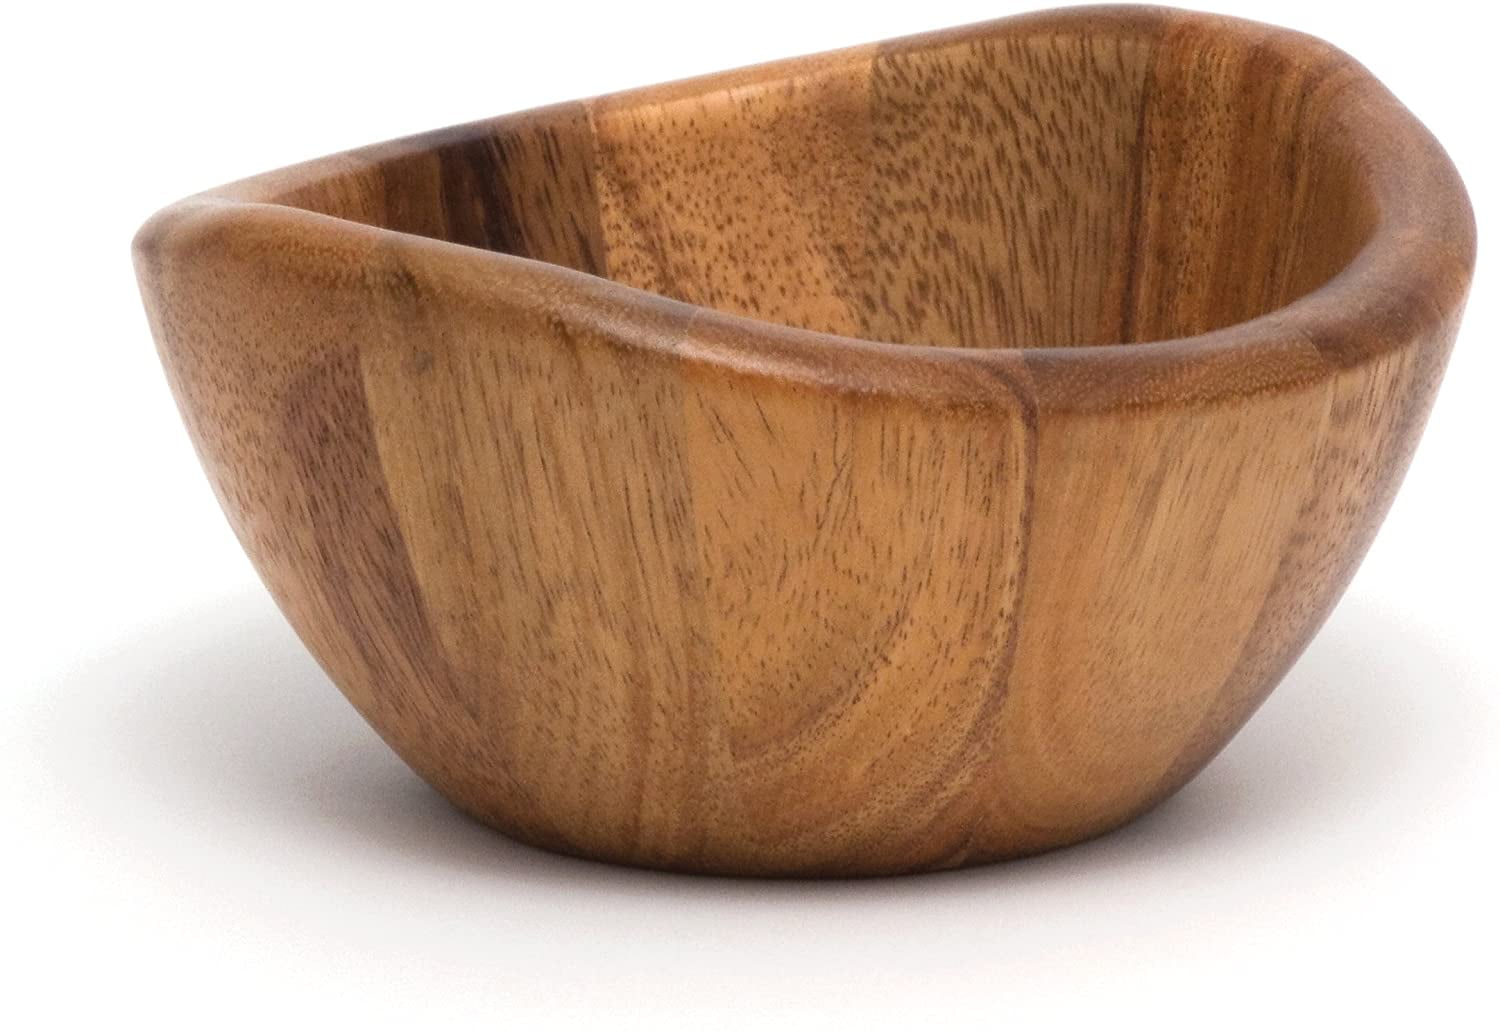 Large 12 Diameter x 5 Height Lipper International 224 Cherry Finished Footed Rice Serving Bowl Single Bowl 